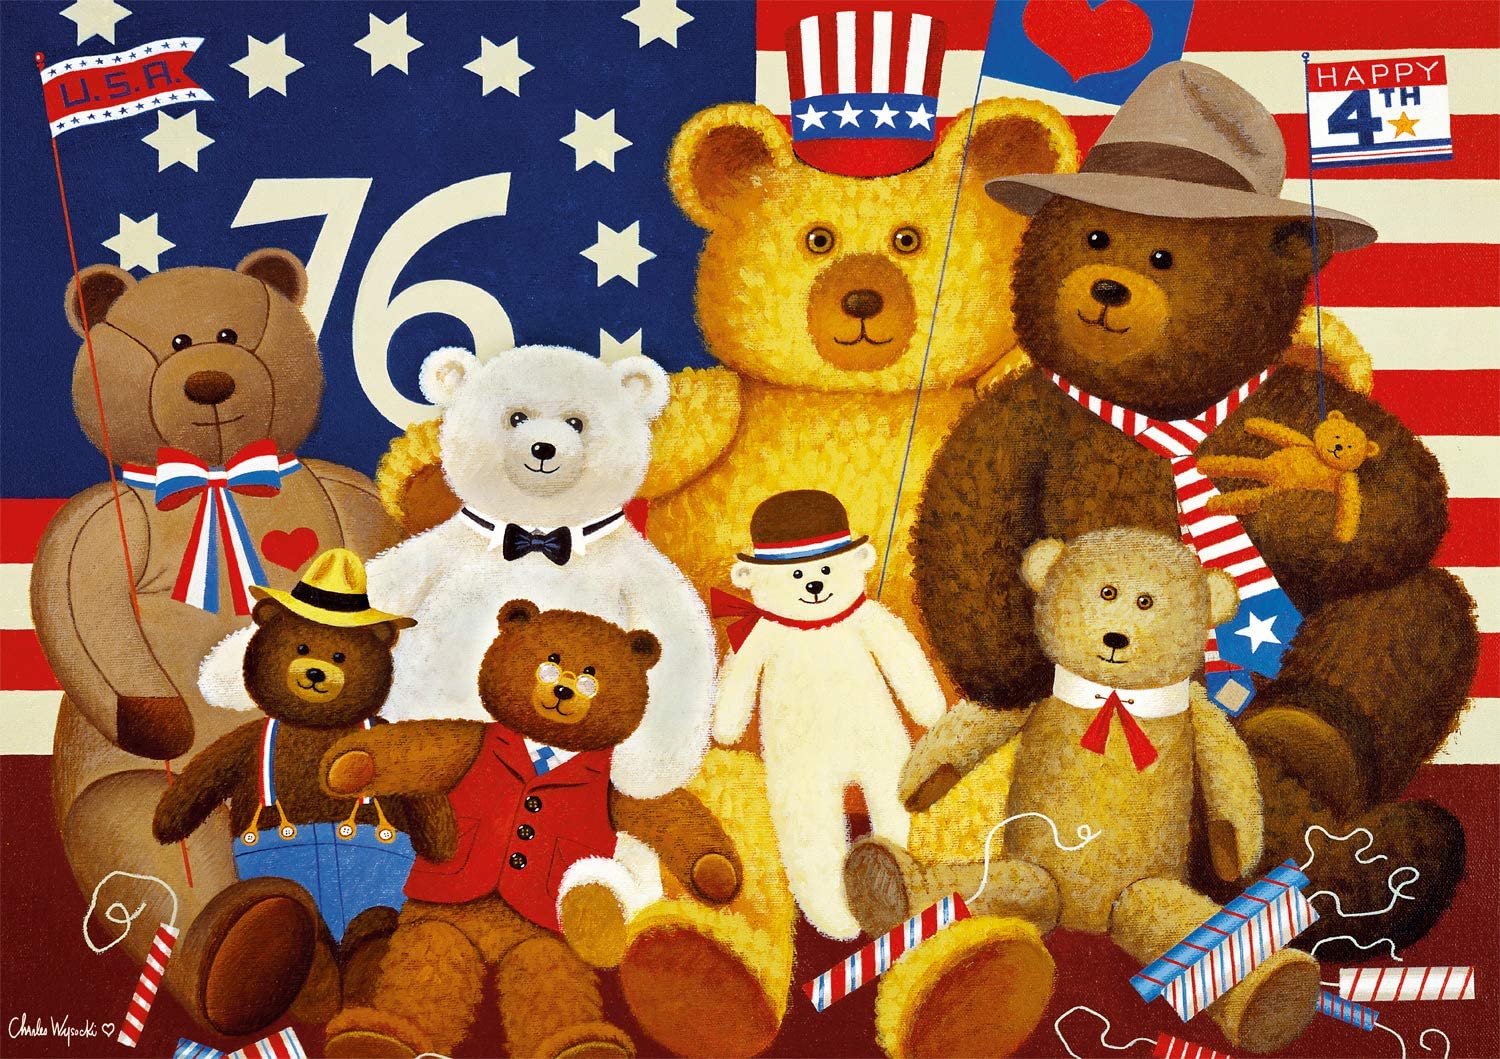 Fourth By The Lake Fourth of July Jigsaw Puzzle By Buffalo Games